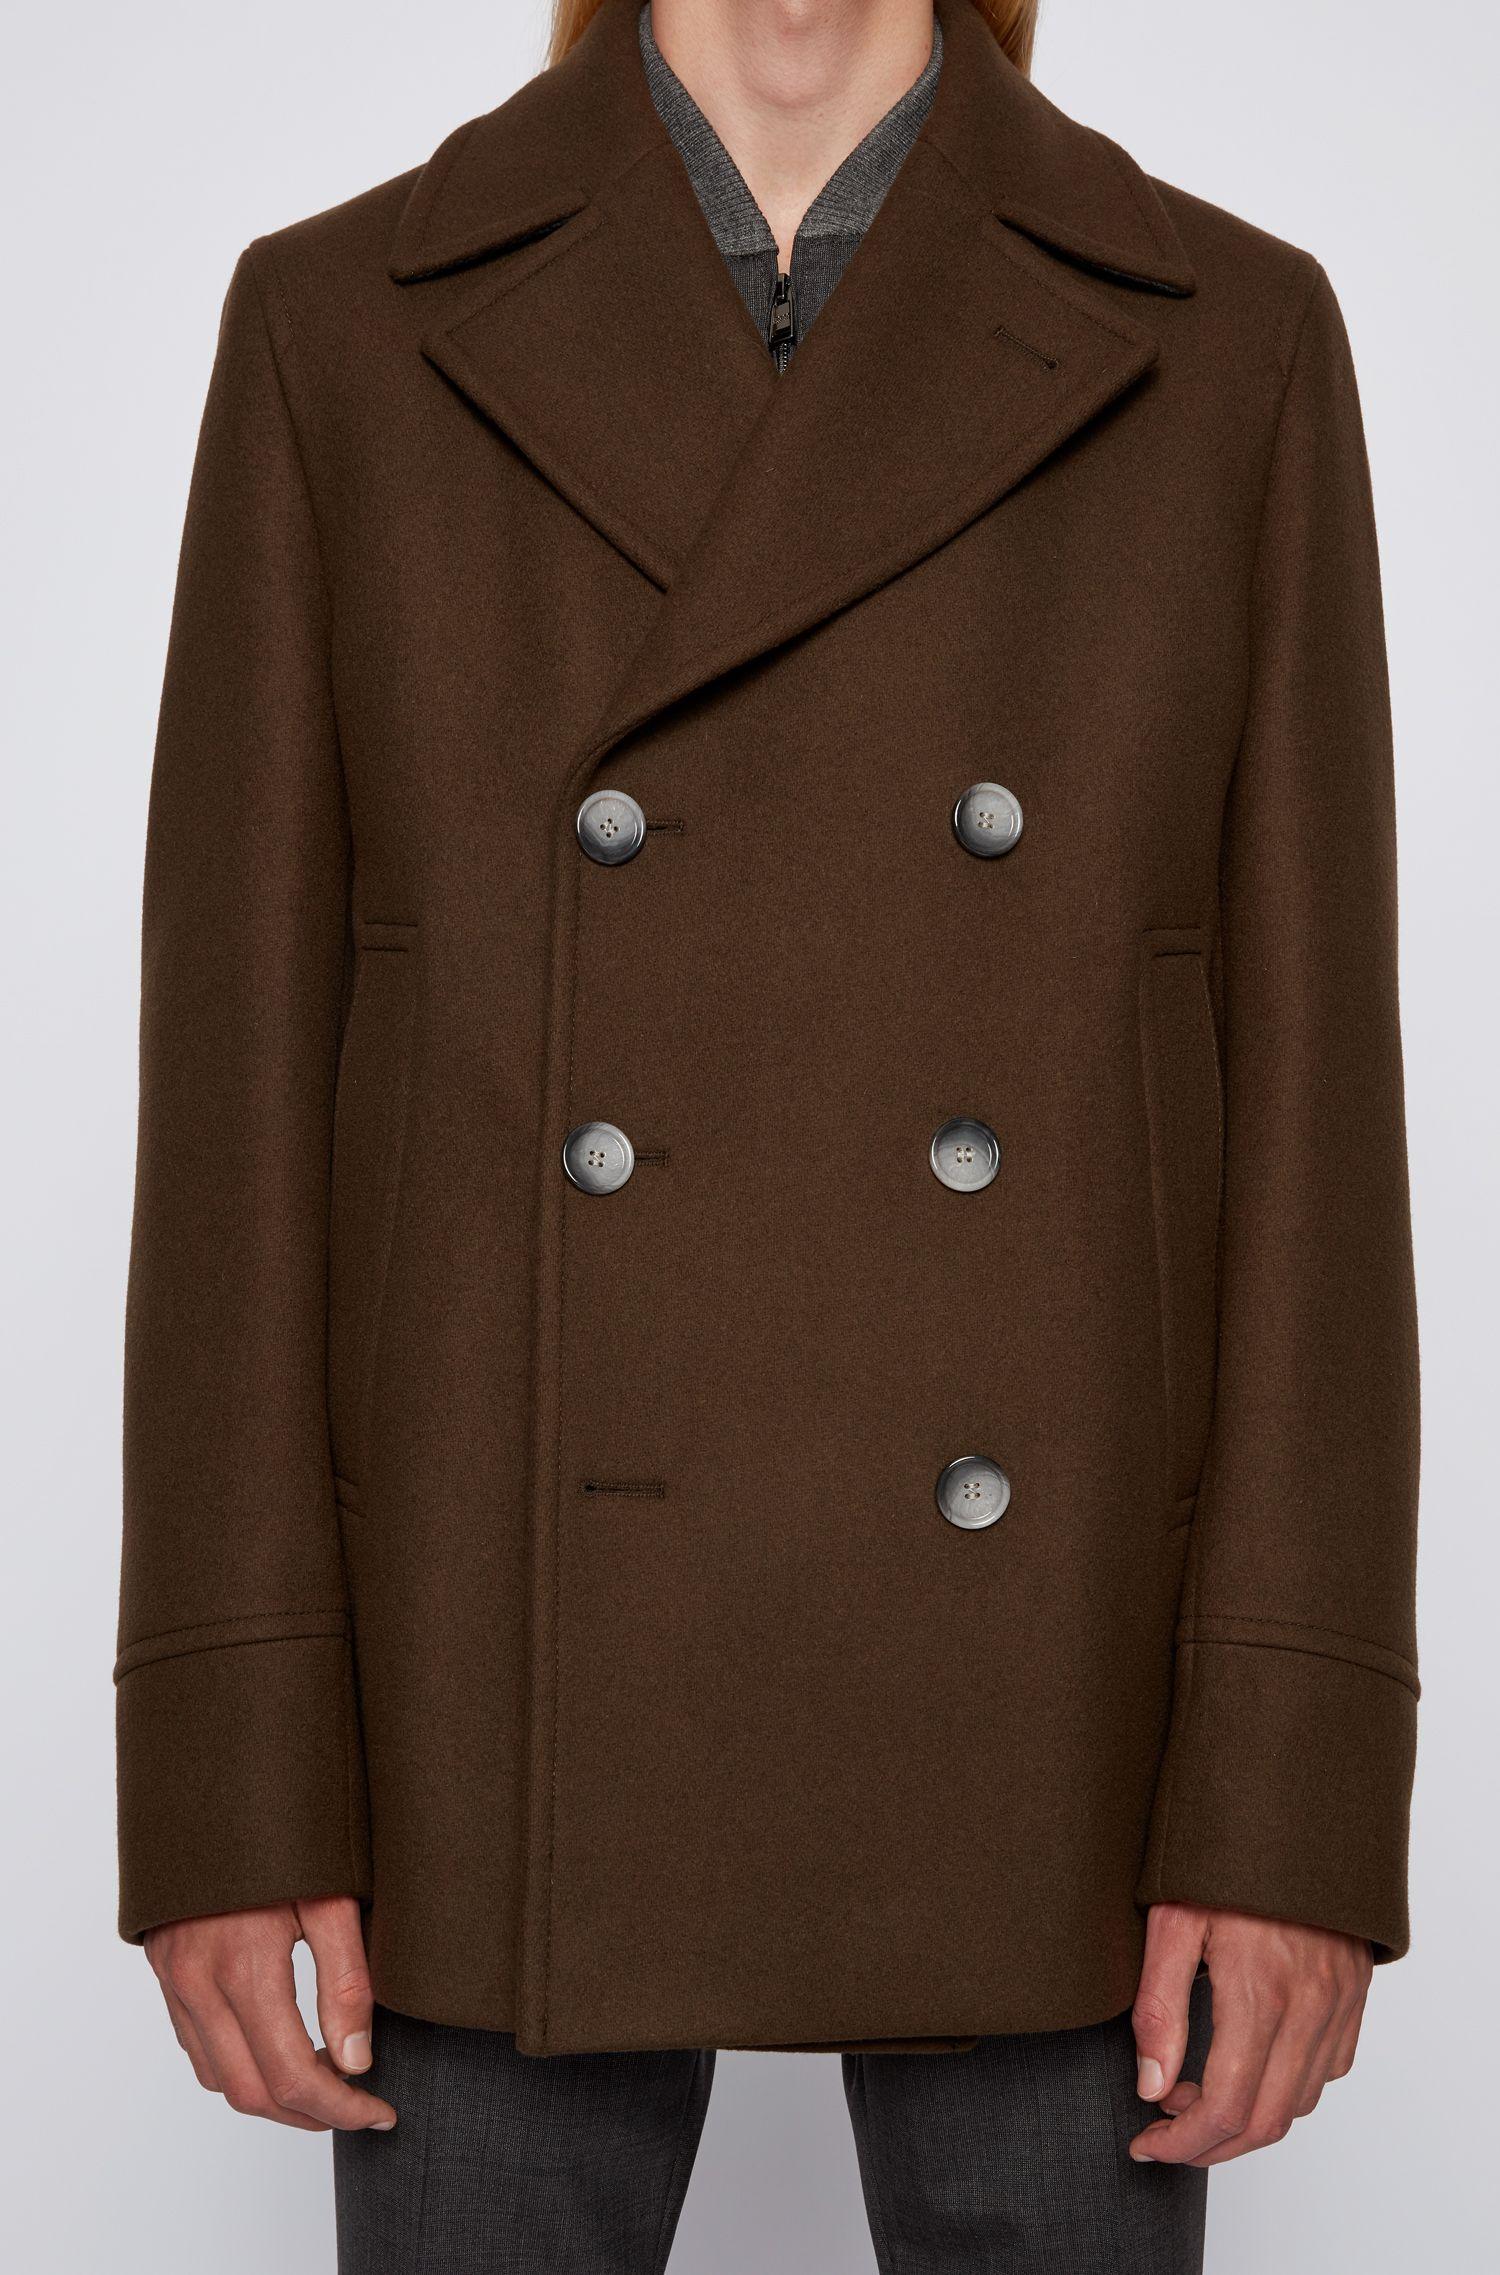 BOSS by Hugo Boss Wool Blend Peacoat With Double Breasted Closure in ...